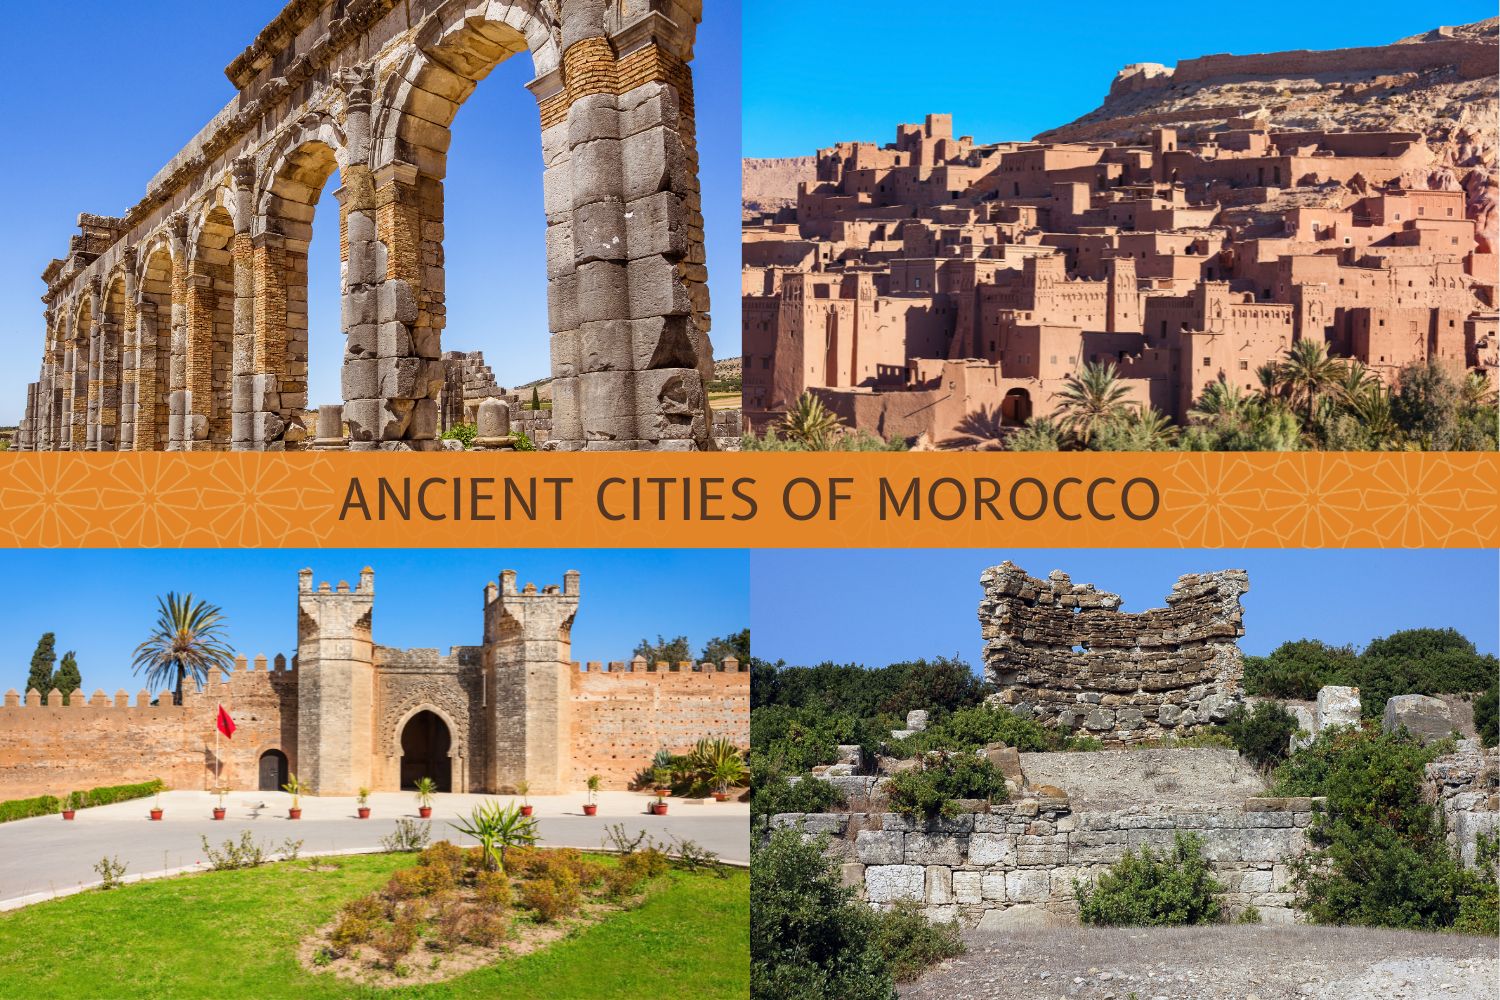 Ancient Cities of Morocco